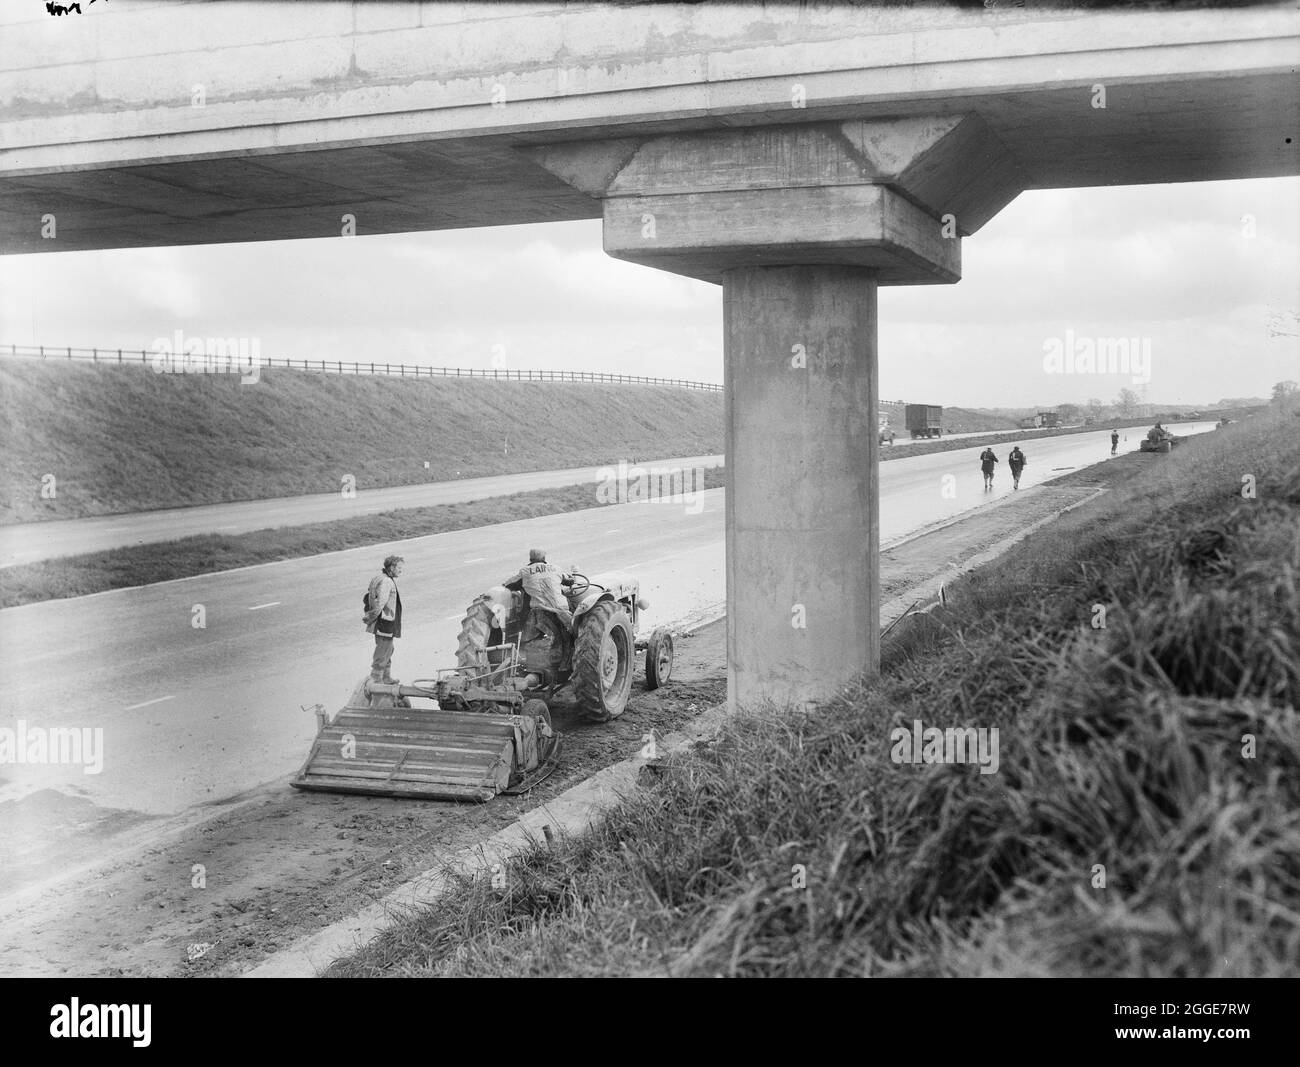 A view of hard shoulder reconstruction works on the M1, the London to Yorkshire Motorway, showing a multipass stabiliser machine at work beneath a bridge. The album caption refers to this image as the 'London/Birmingham Motorway'. Stock Photo